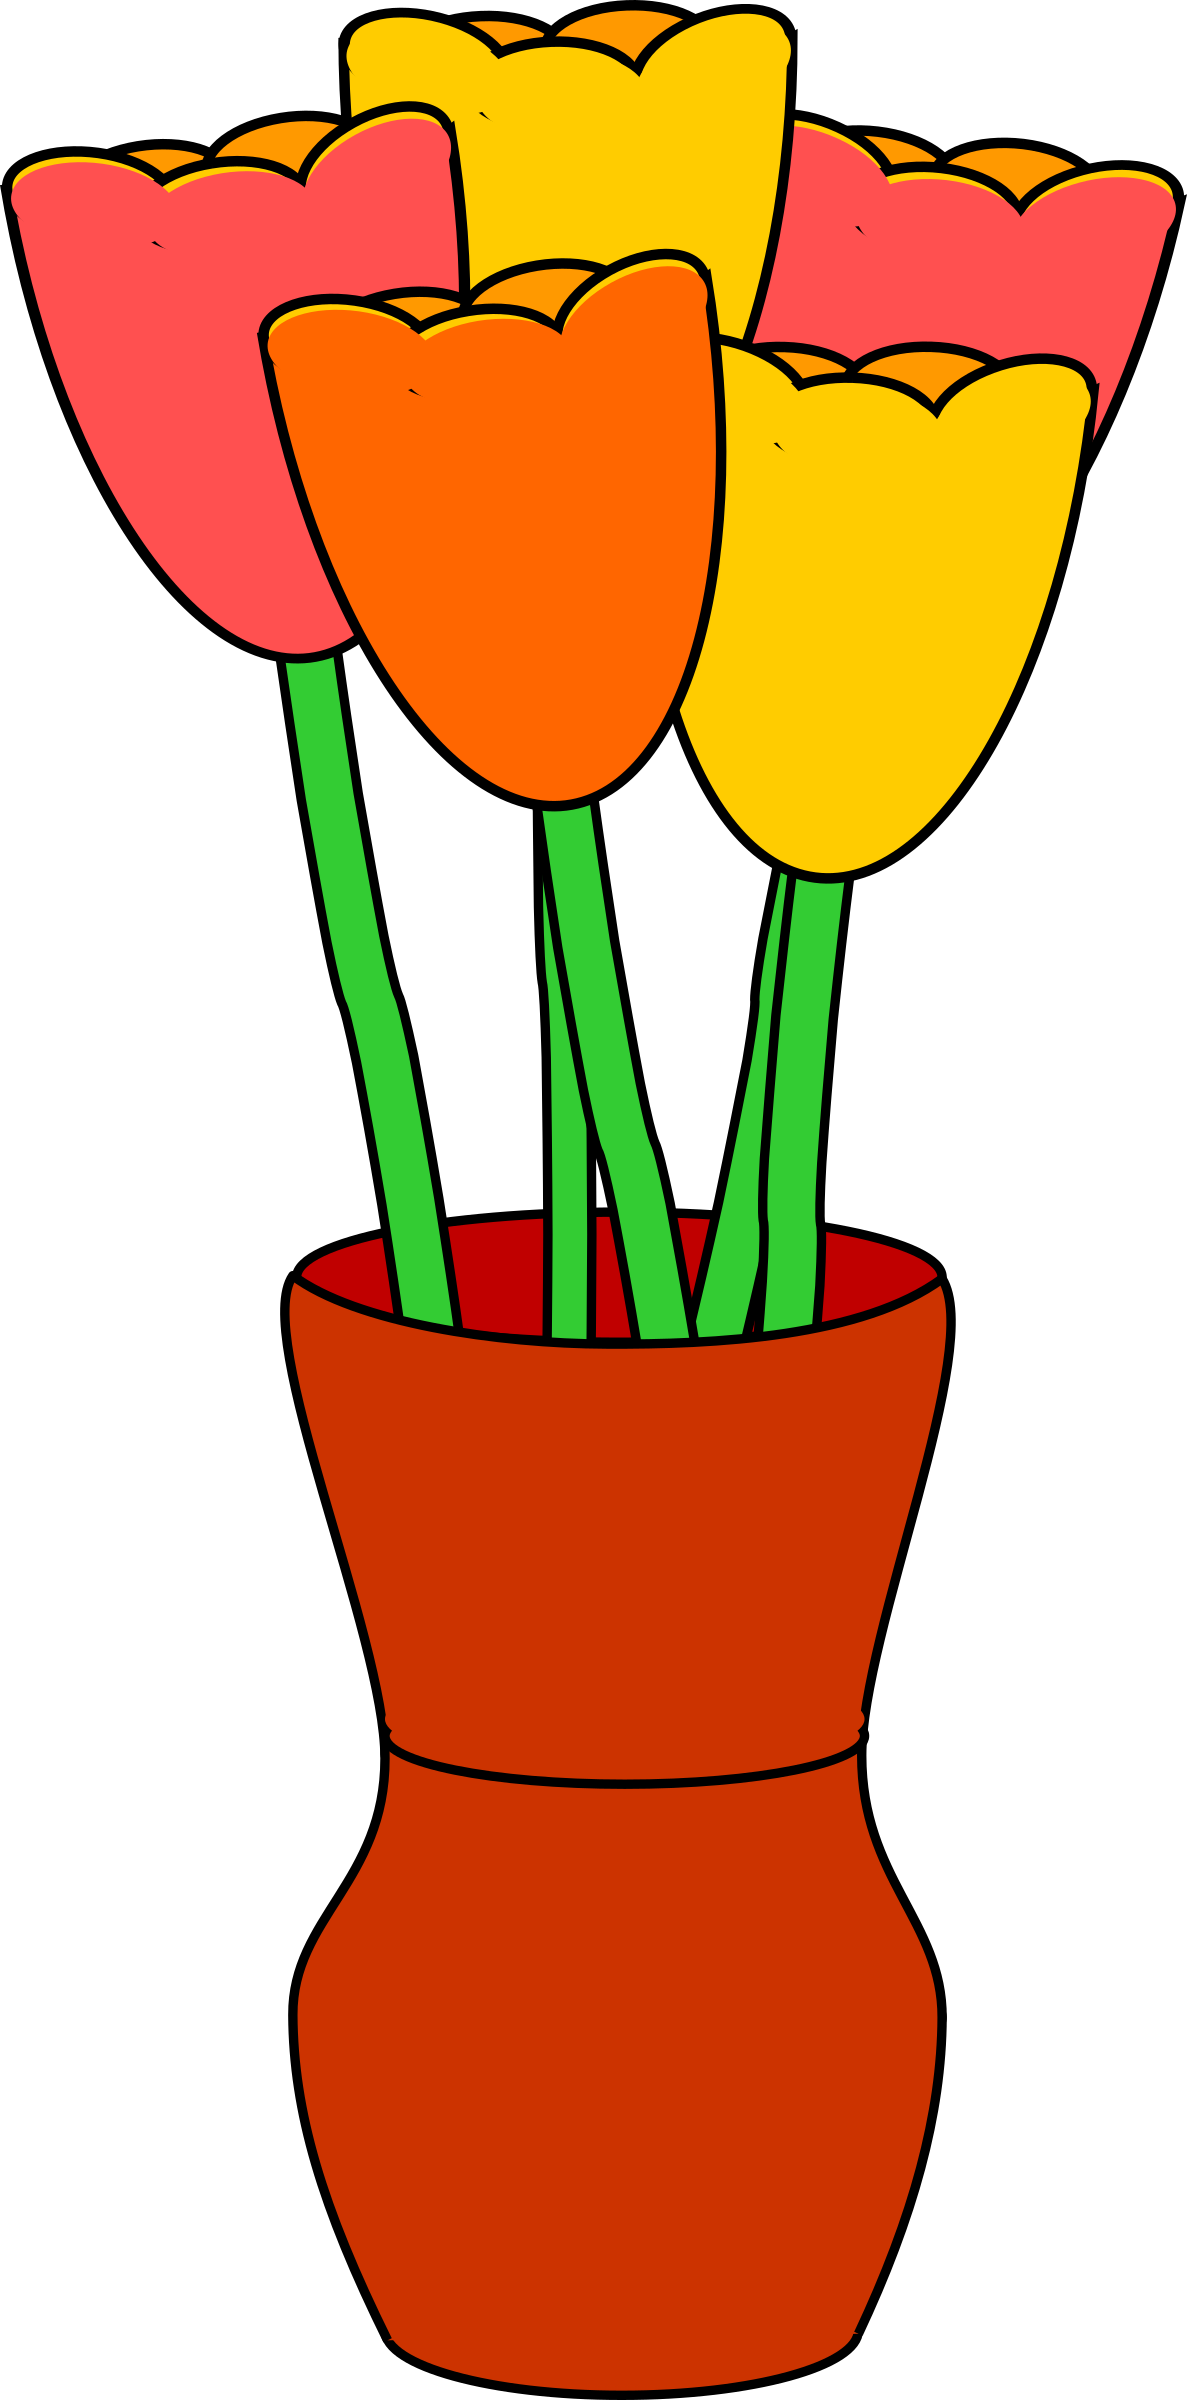 Big Image - Flowers In Vase Clipart (1187x2400)